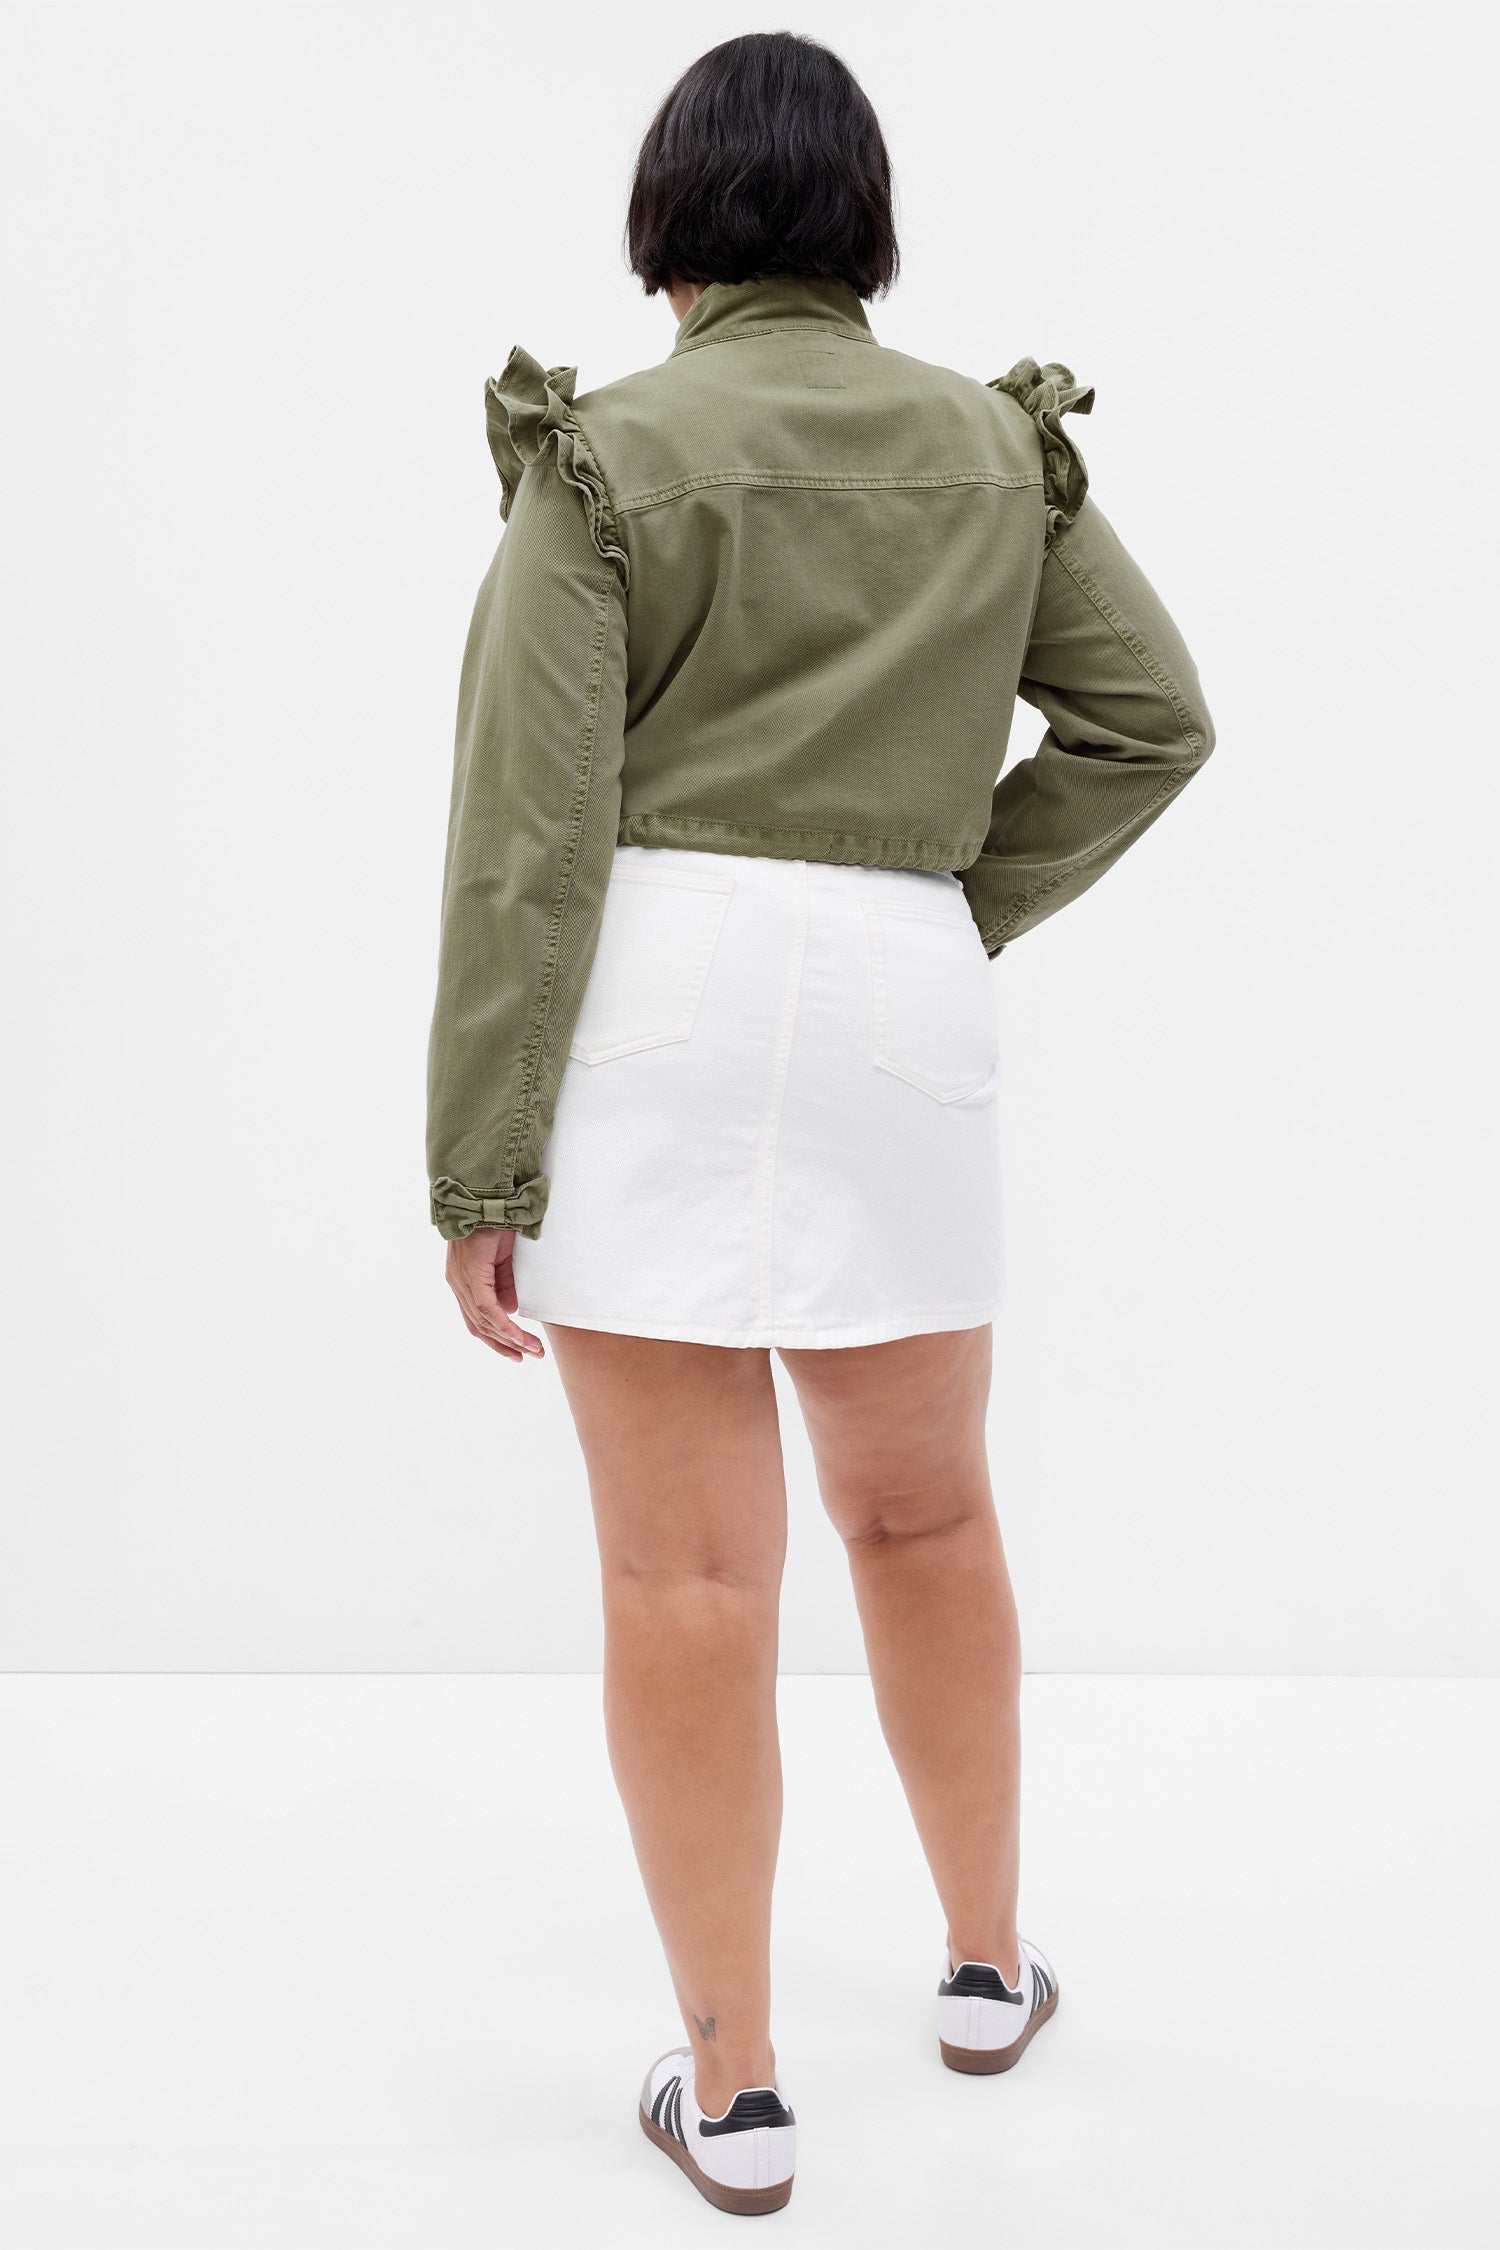 Back image of model wearing green crop utility jacket with ruffle shoulders